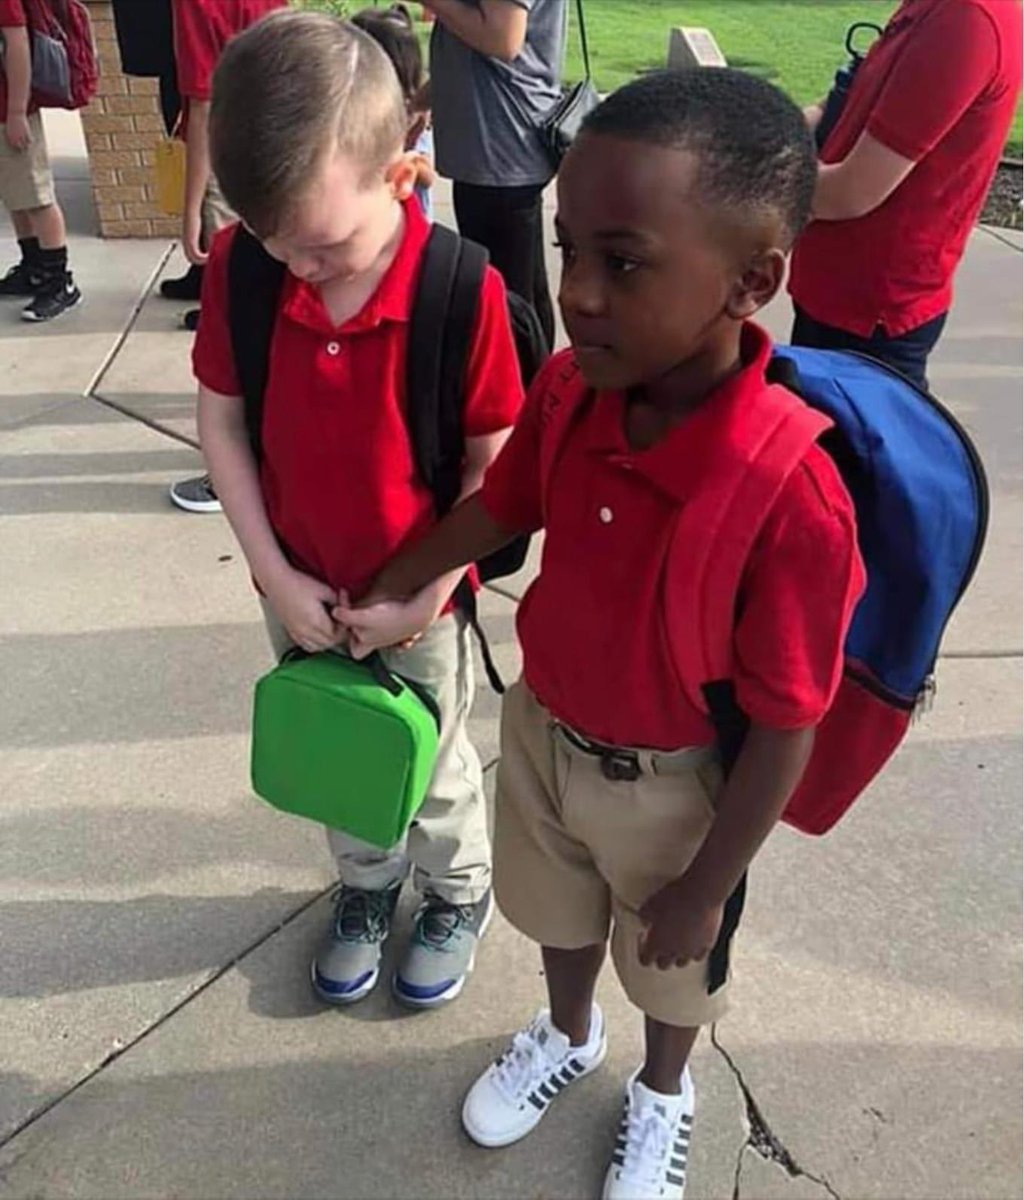 The boy with the green lunchbox is a child with special needs. He was so terrified to go to school he wept. The boy with the blue backpack comforted him by walking up & holding his hand. Kids will spread love if we don’t poison them with our prejudices. (How To Dad)